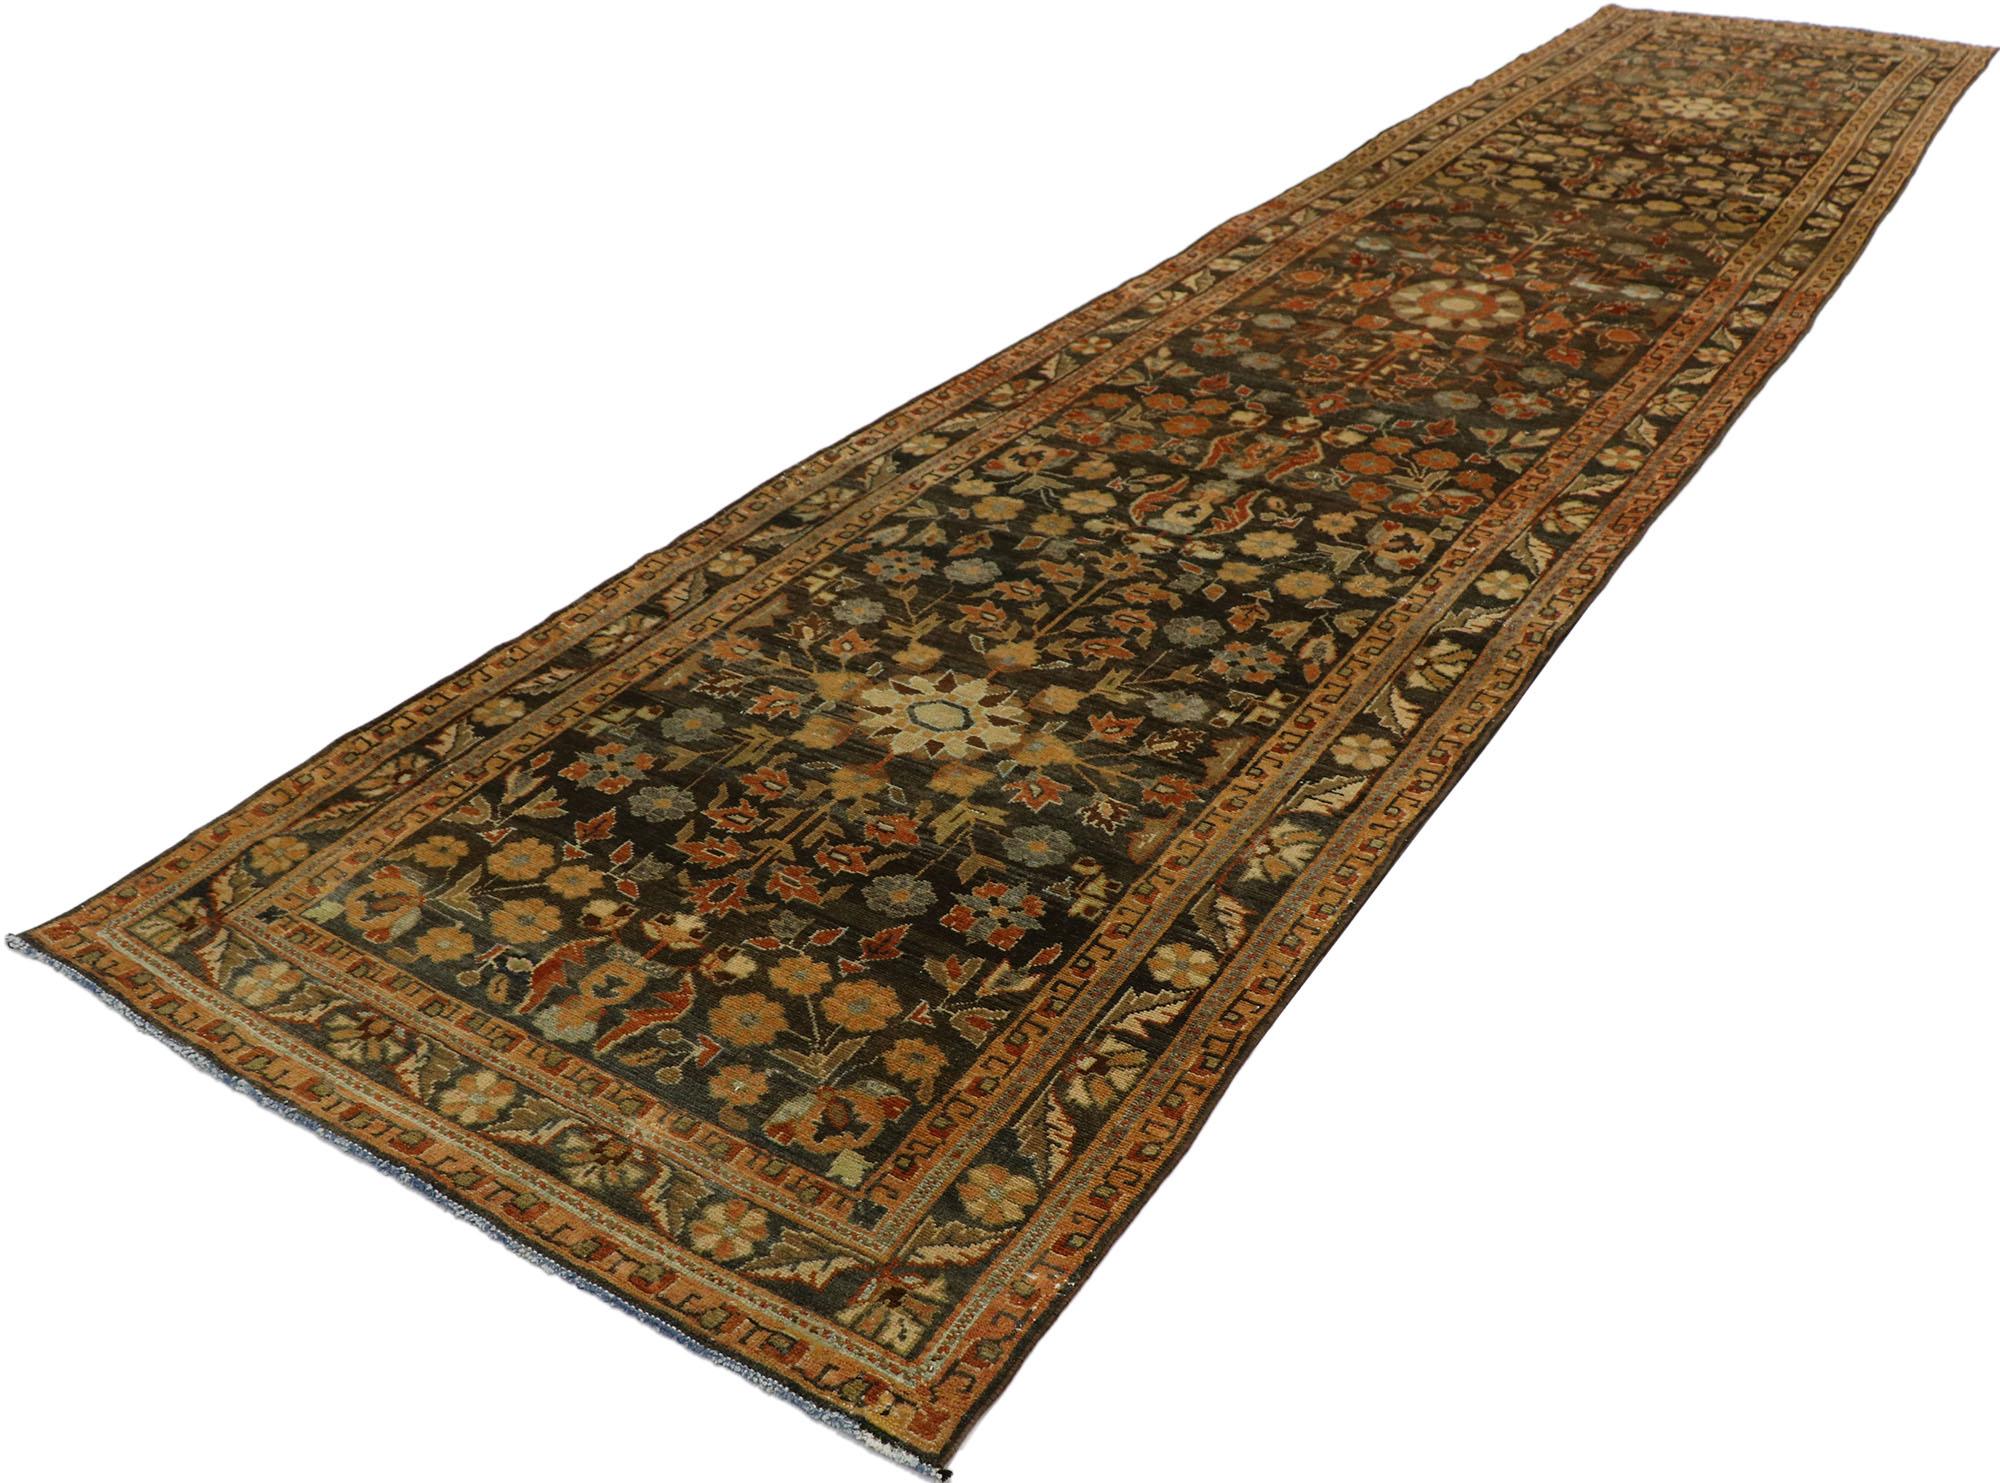 53237 antique Persian Malayer Runner with Rustic Jacobean style. This hand knotted wool antique Persian Malayer runner features an all-over Guli Hinnai pattern overlaid upon an abrashed brown and gray field. Comprised of henna flowers arranged in a